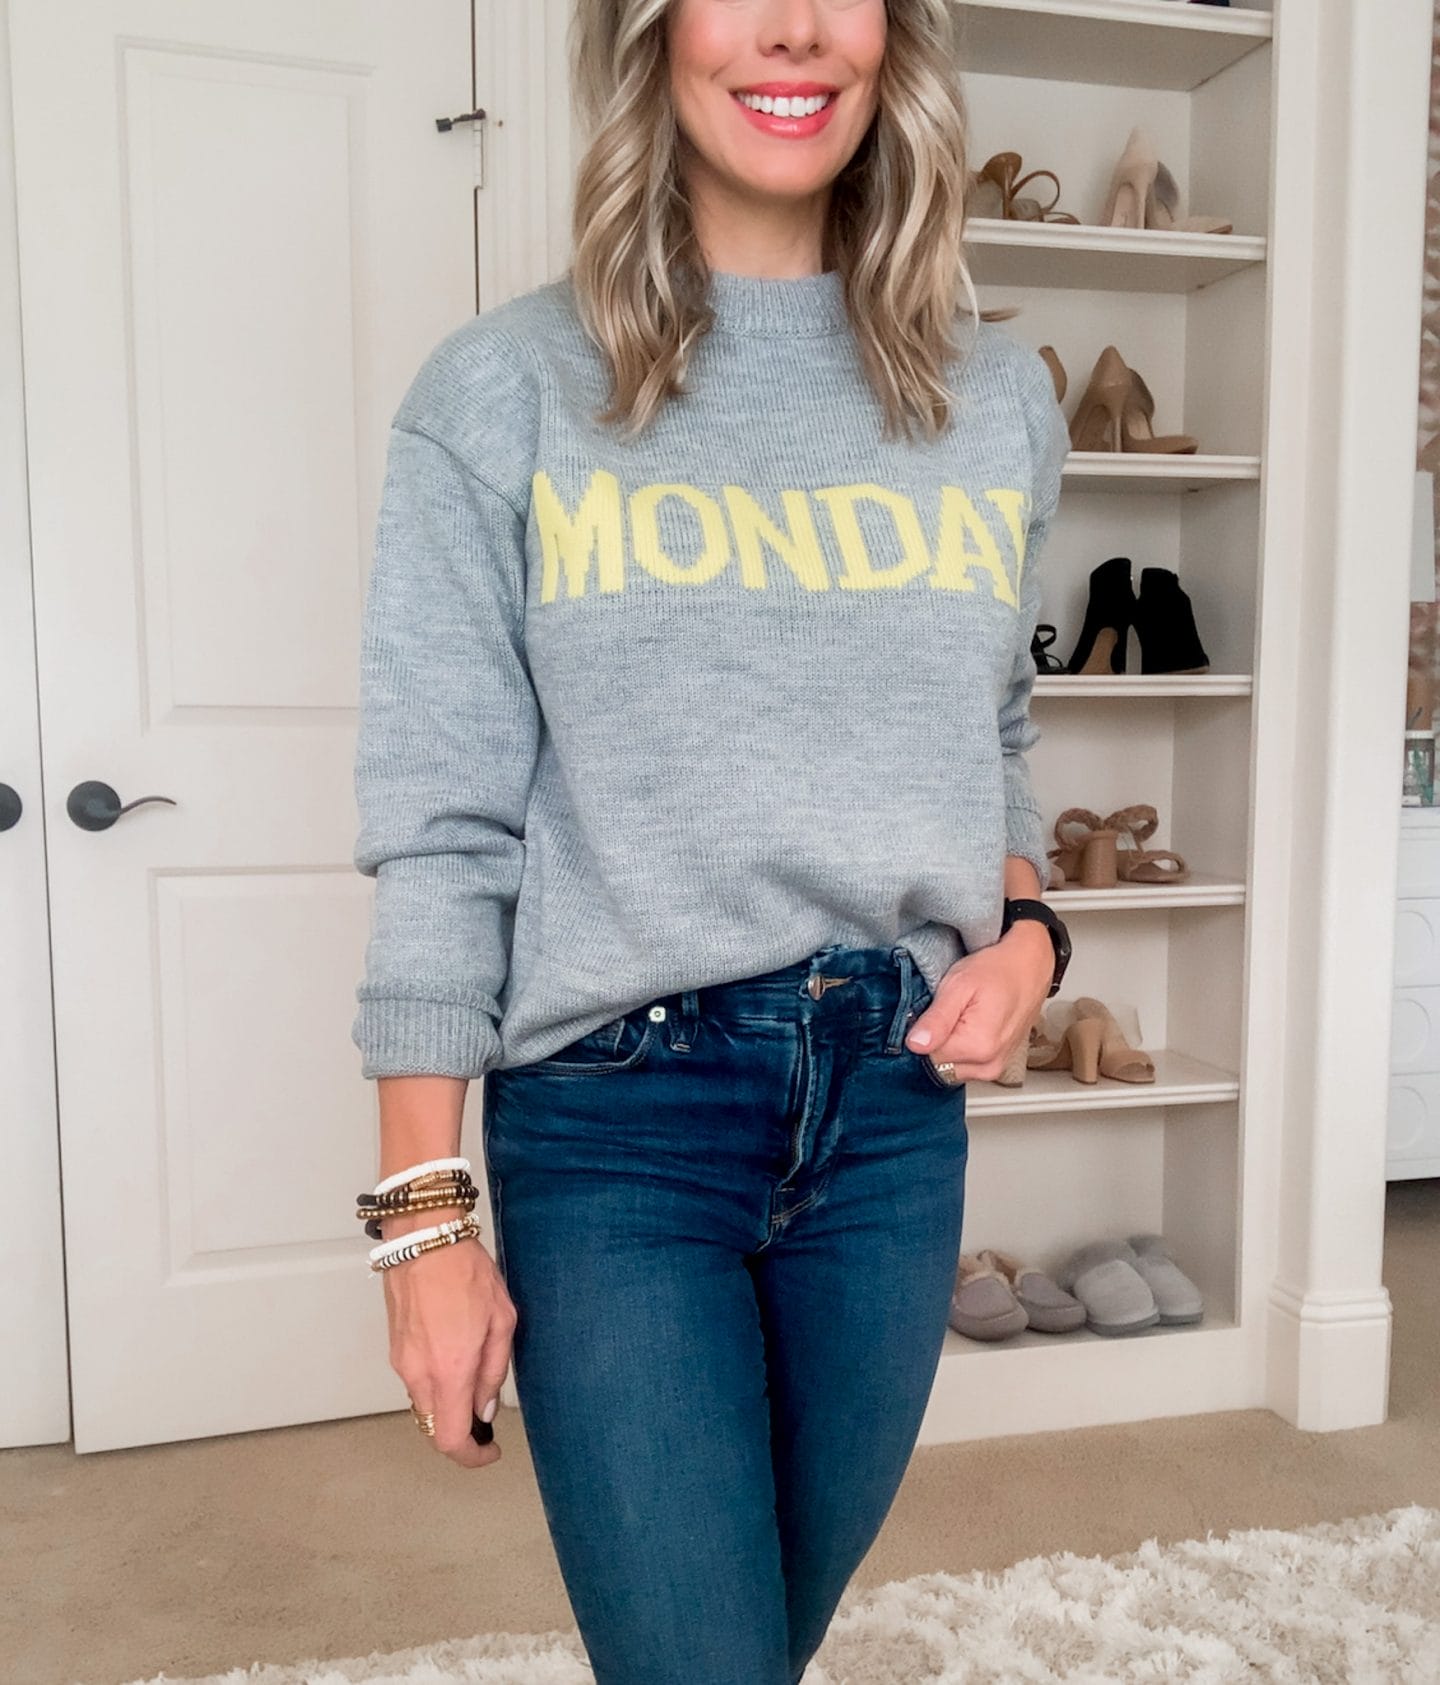 Dressing Room Finds, Monday Sweater, Jeans, Sneakers 